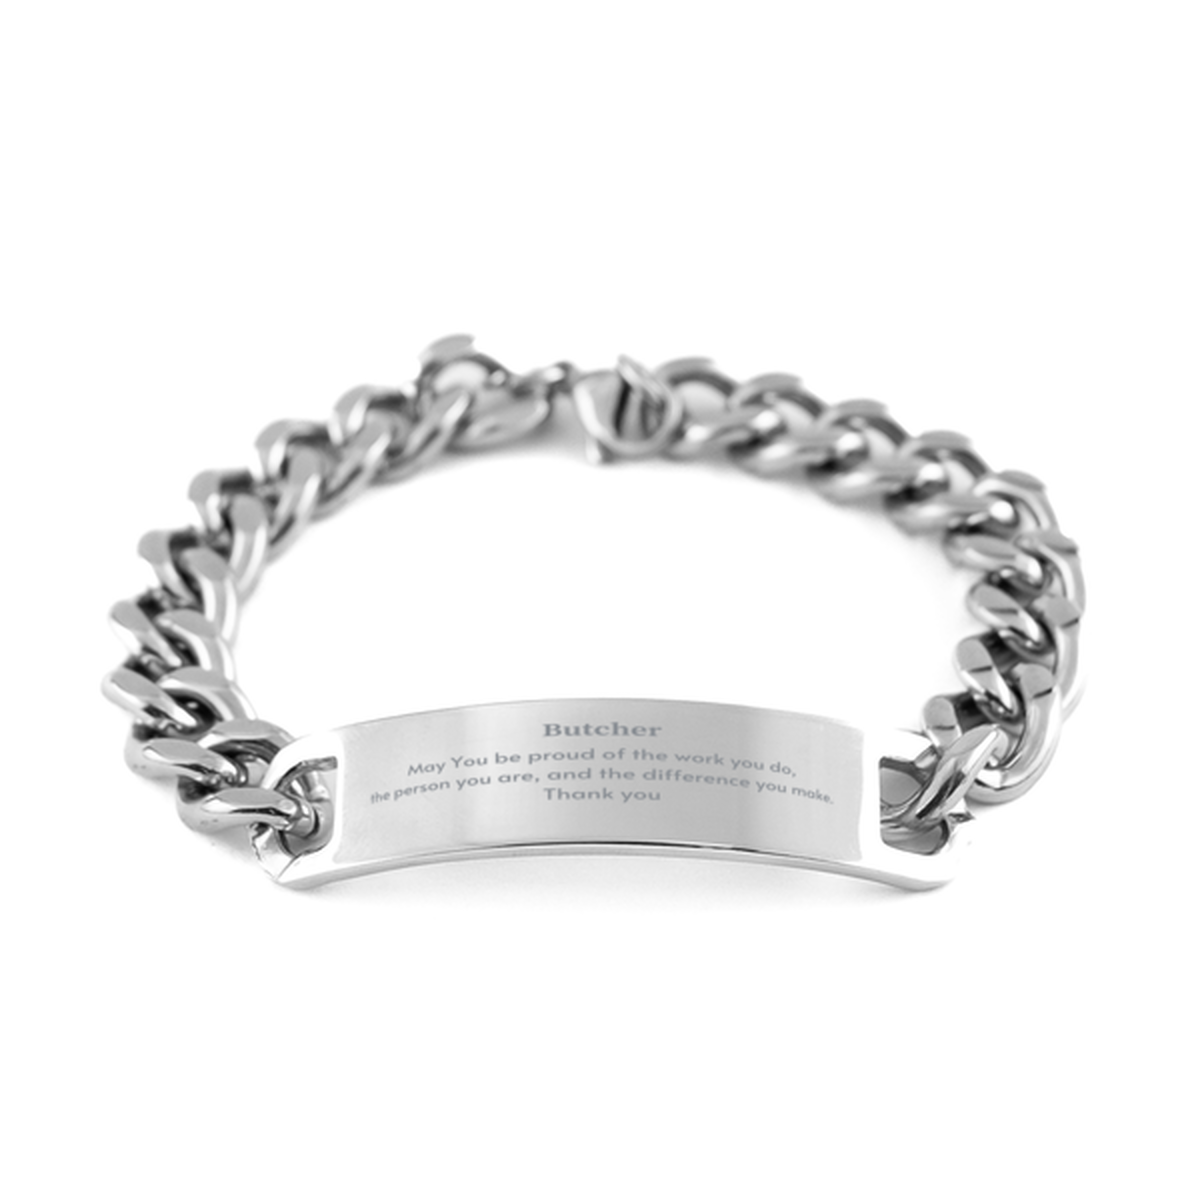 Heartwarming Cuban Chain Stainless Steel Bracelet Retirement Coworkers Gifts for Butcher, Butcher May You be proud of the work you do, the person you are Gifts for Boss Men Women Friends